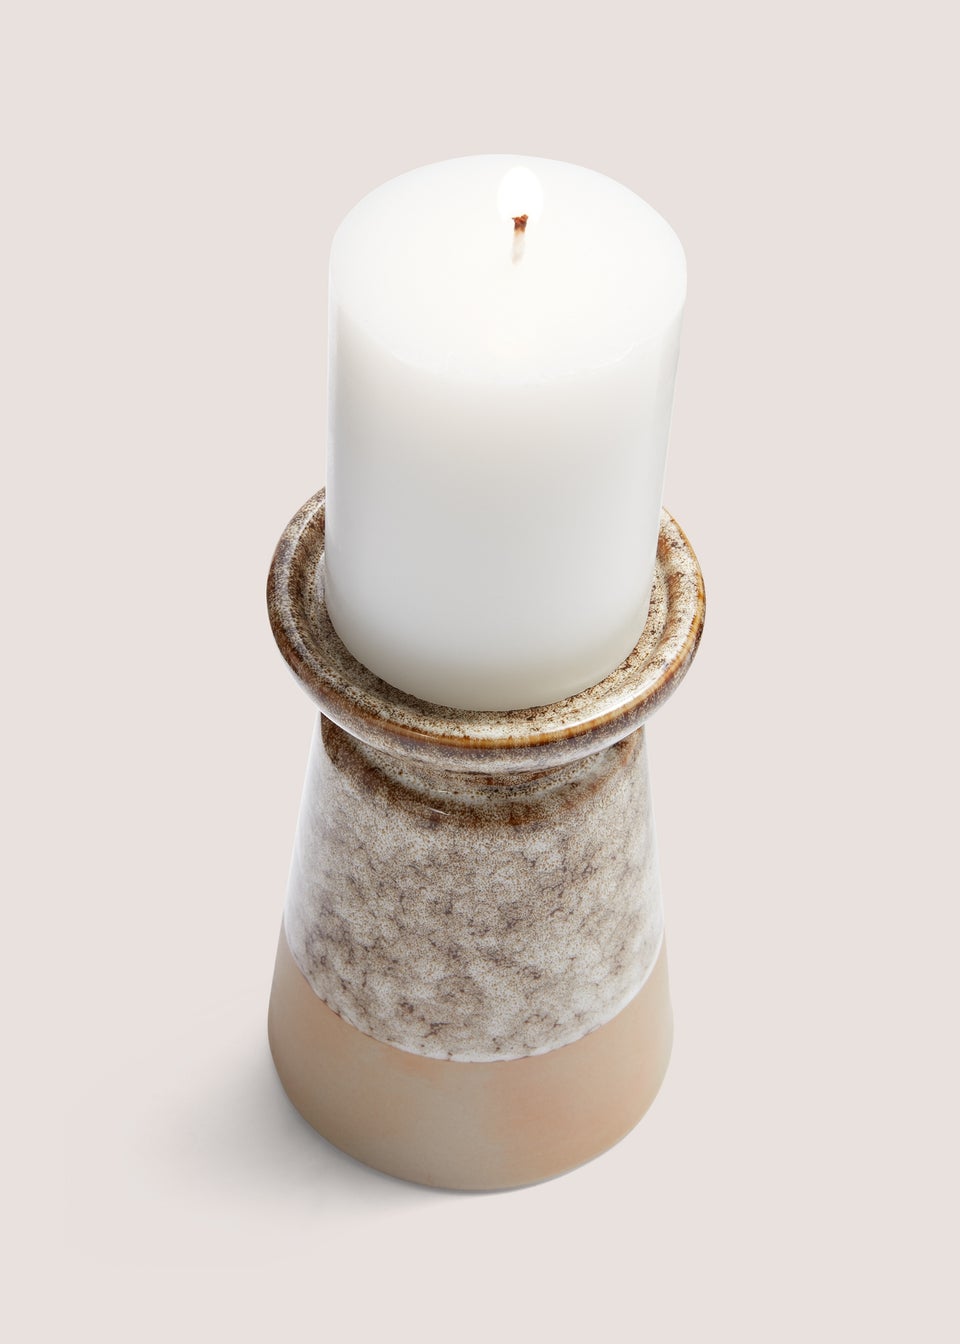 Gold Casa Speckled Candle Holder (16cm x 10cm x 10cm)